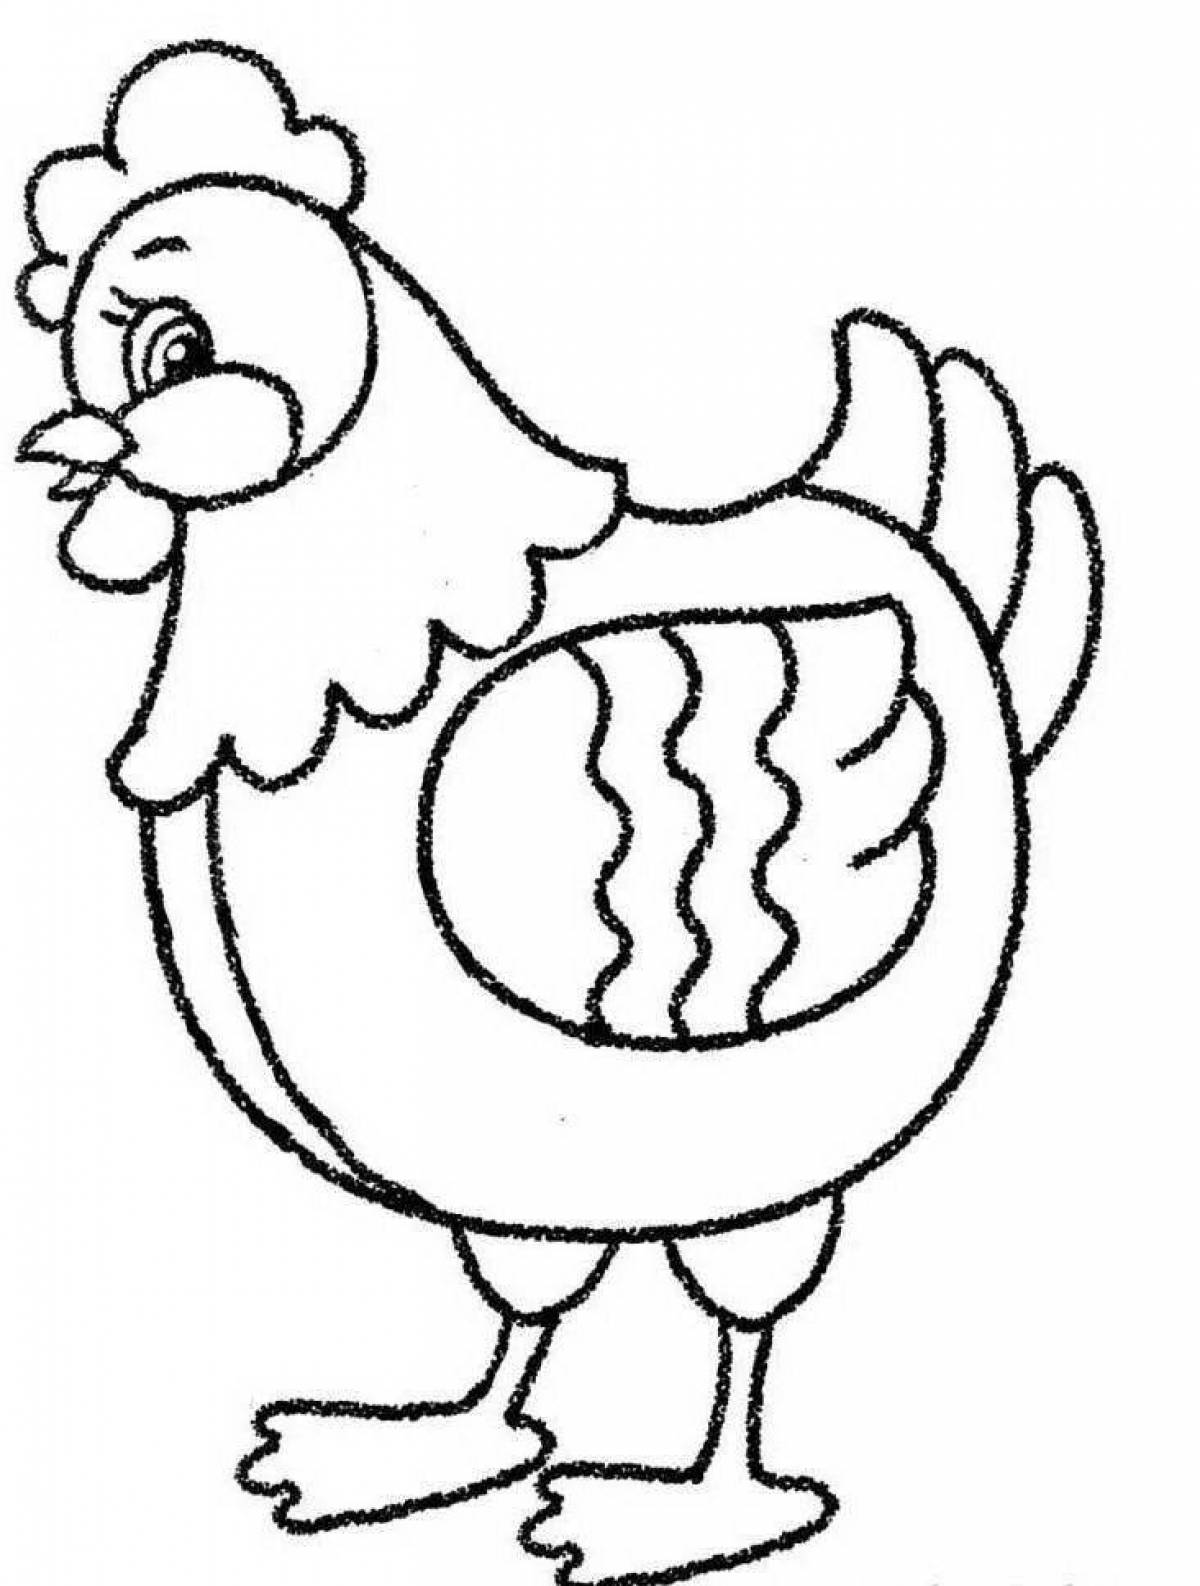 Playful chick pockmarked coloring book for kids